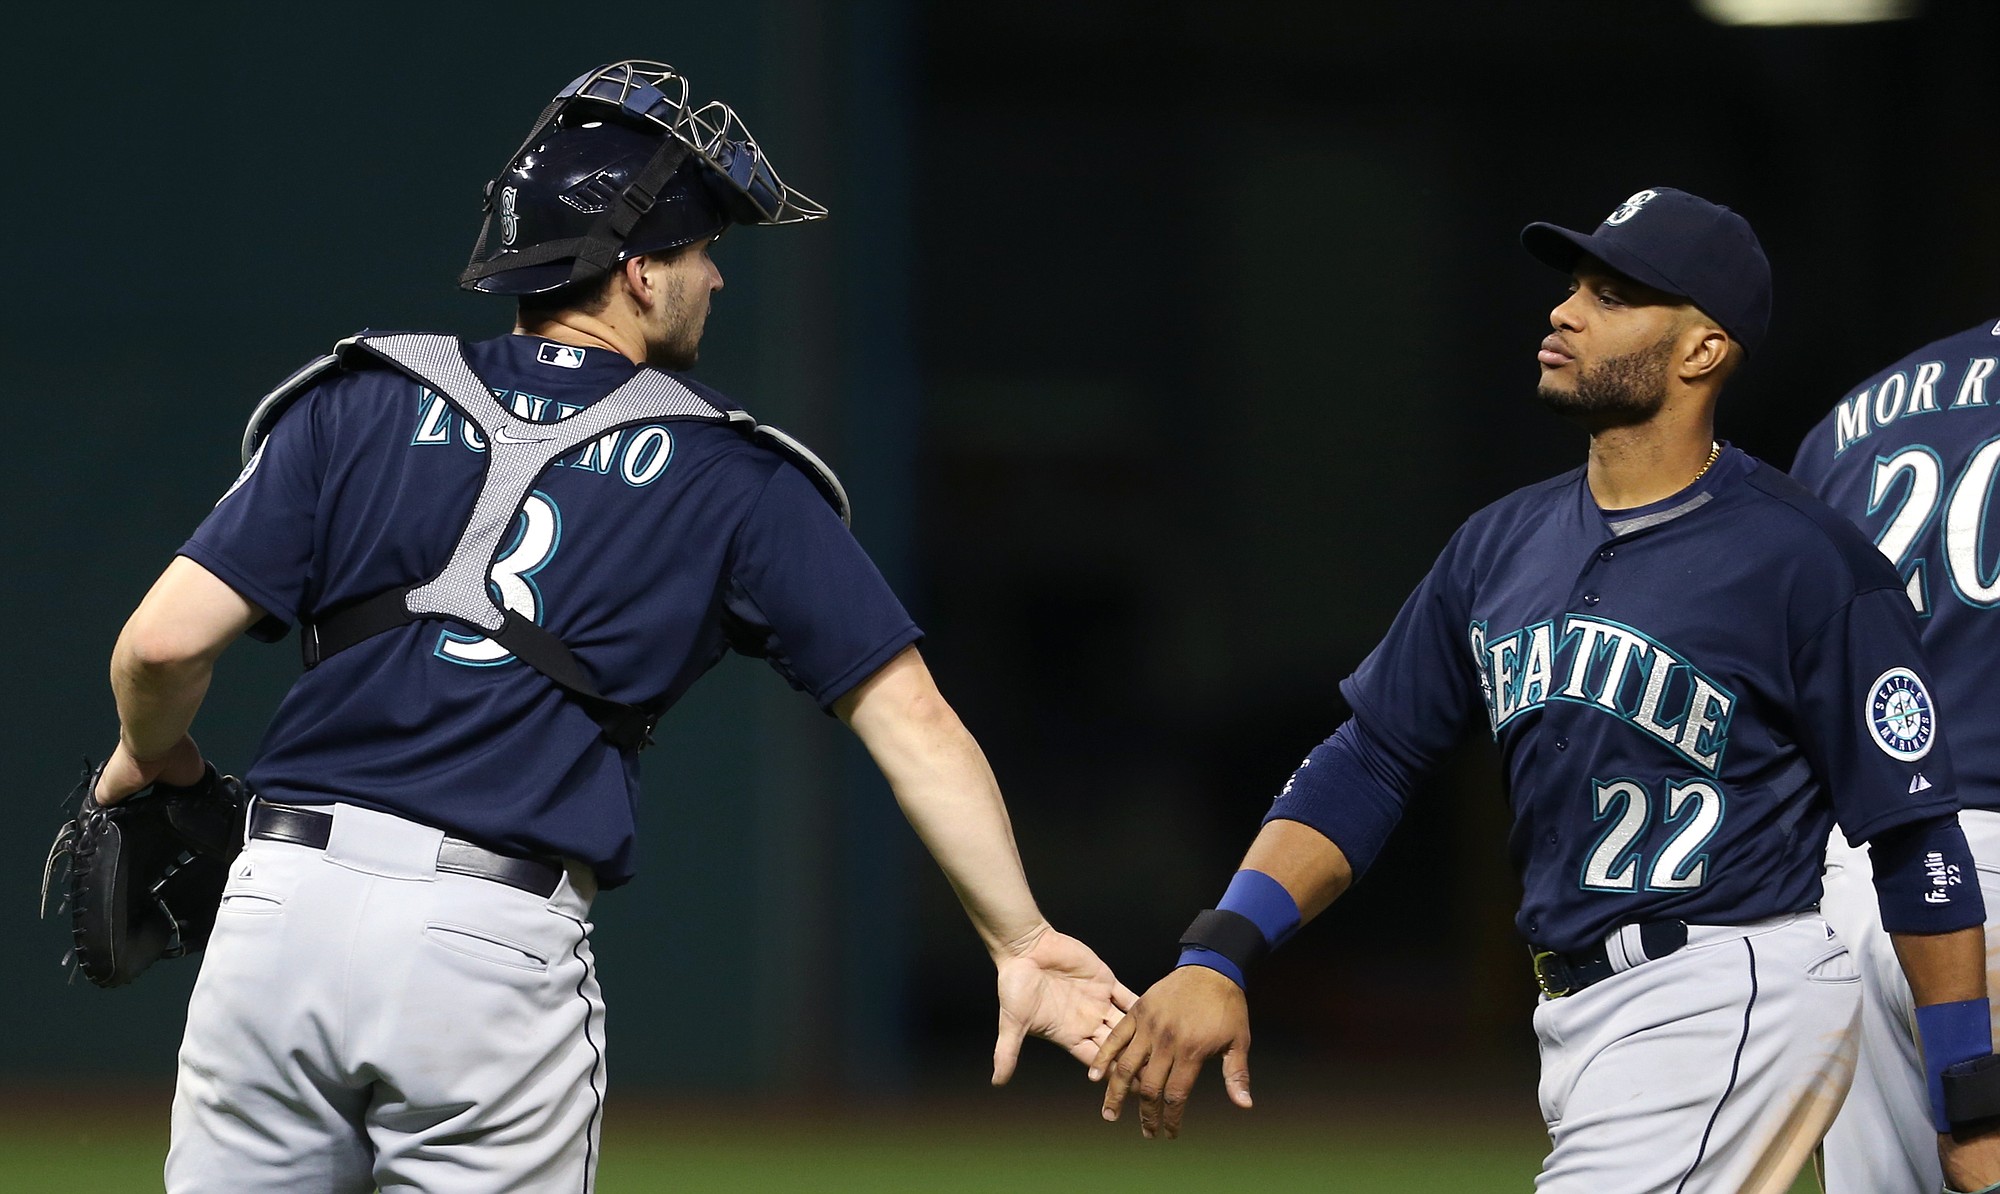 Seattle Mariners catcher Mike Zunino, left, and Robinson Cano celebrate after beating the Cleveland Indians 3-2 Tuesday in Cleveland.